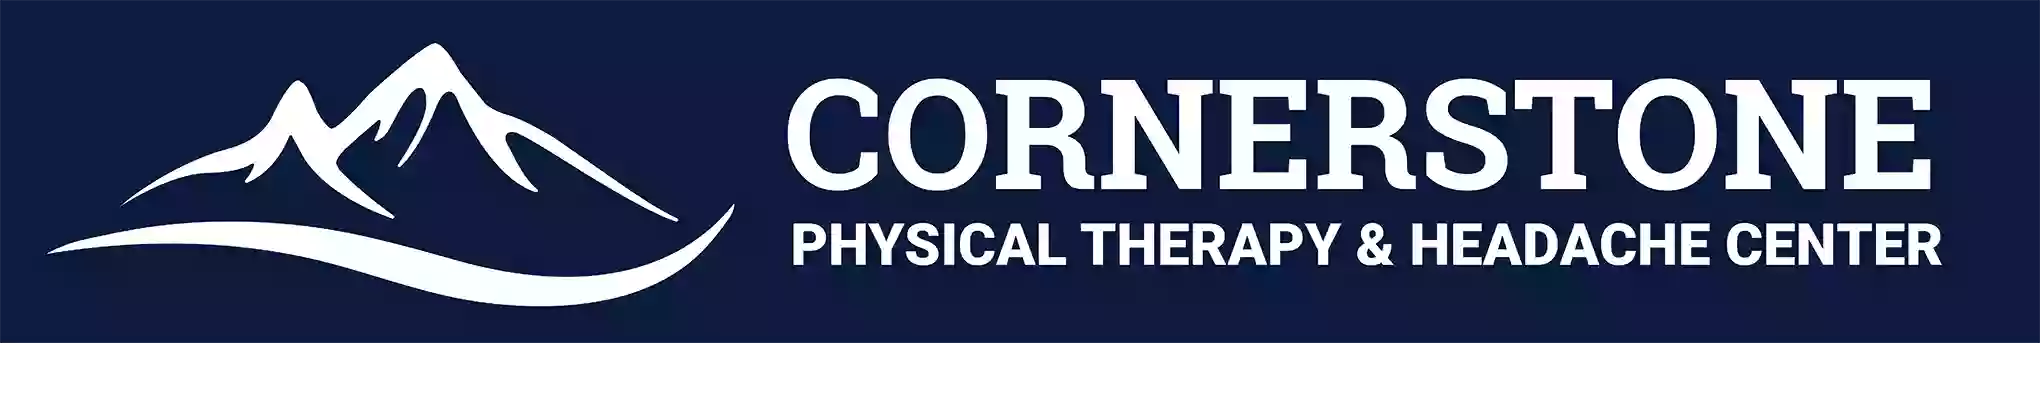 Cornerstone Physical Therapy | Dry Needling, TMJ Disorder Treatment, Headache Physical Therapy